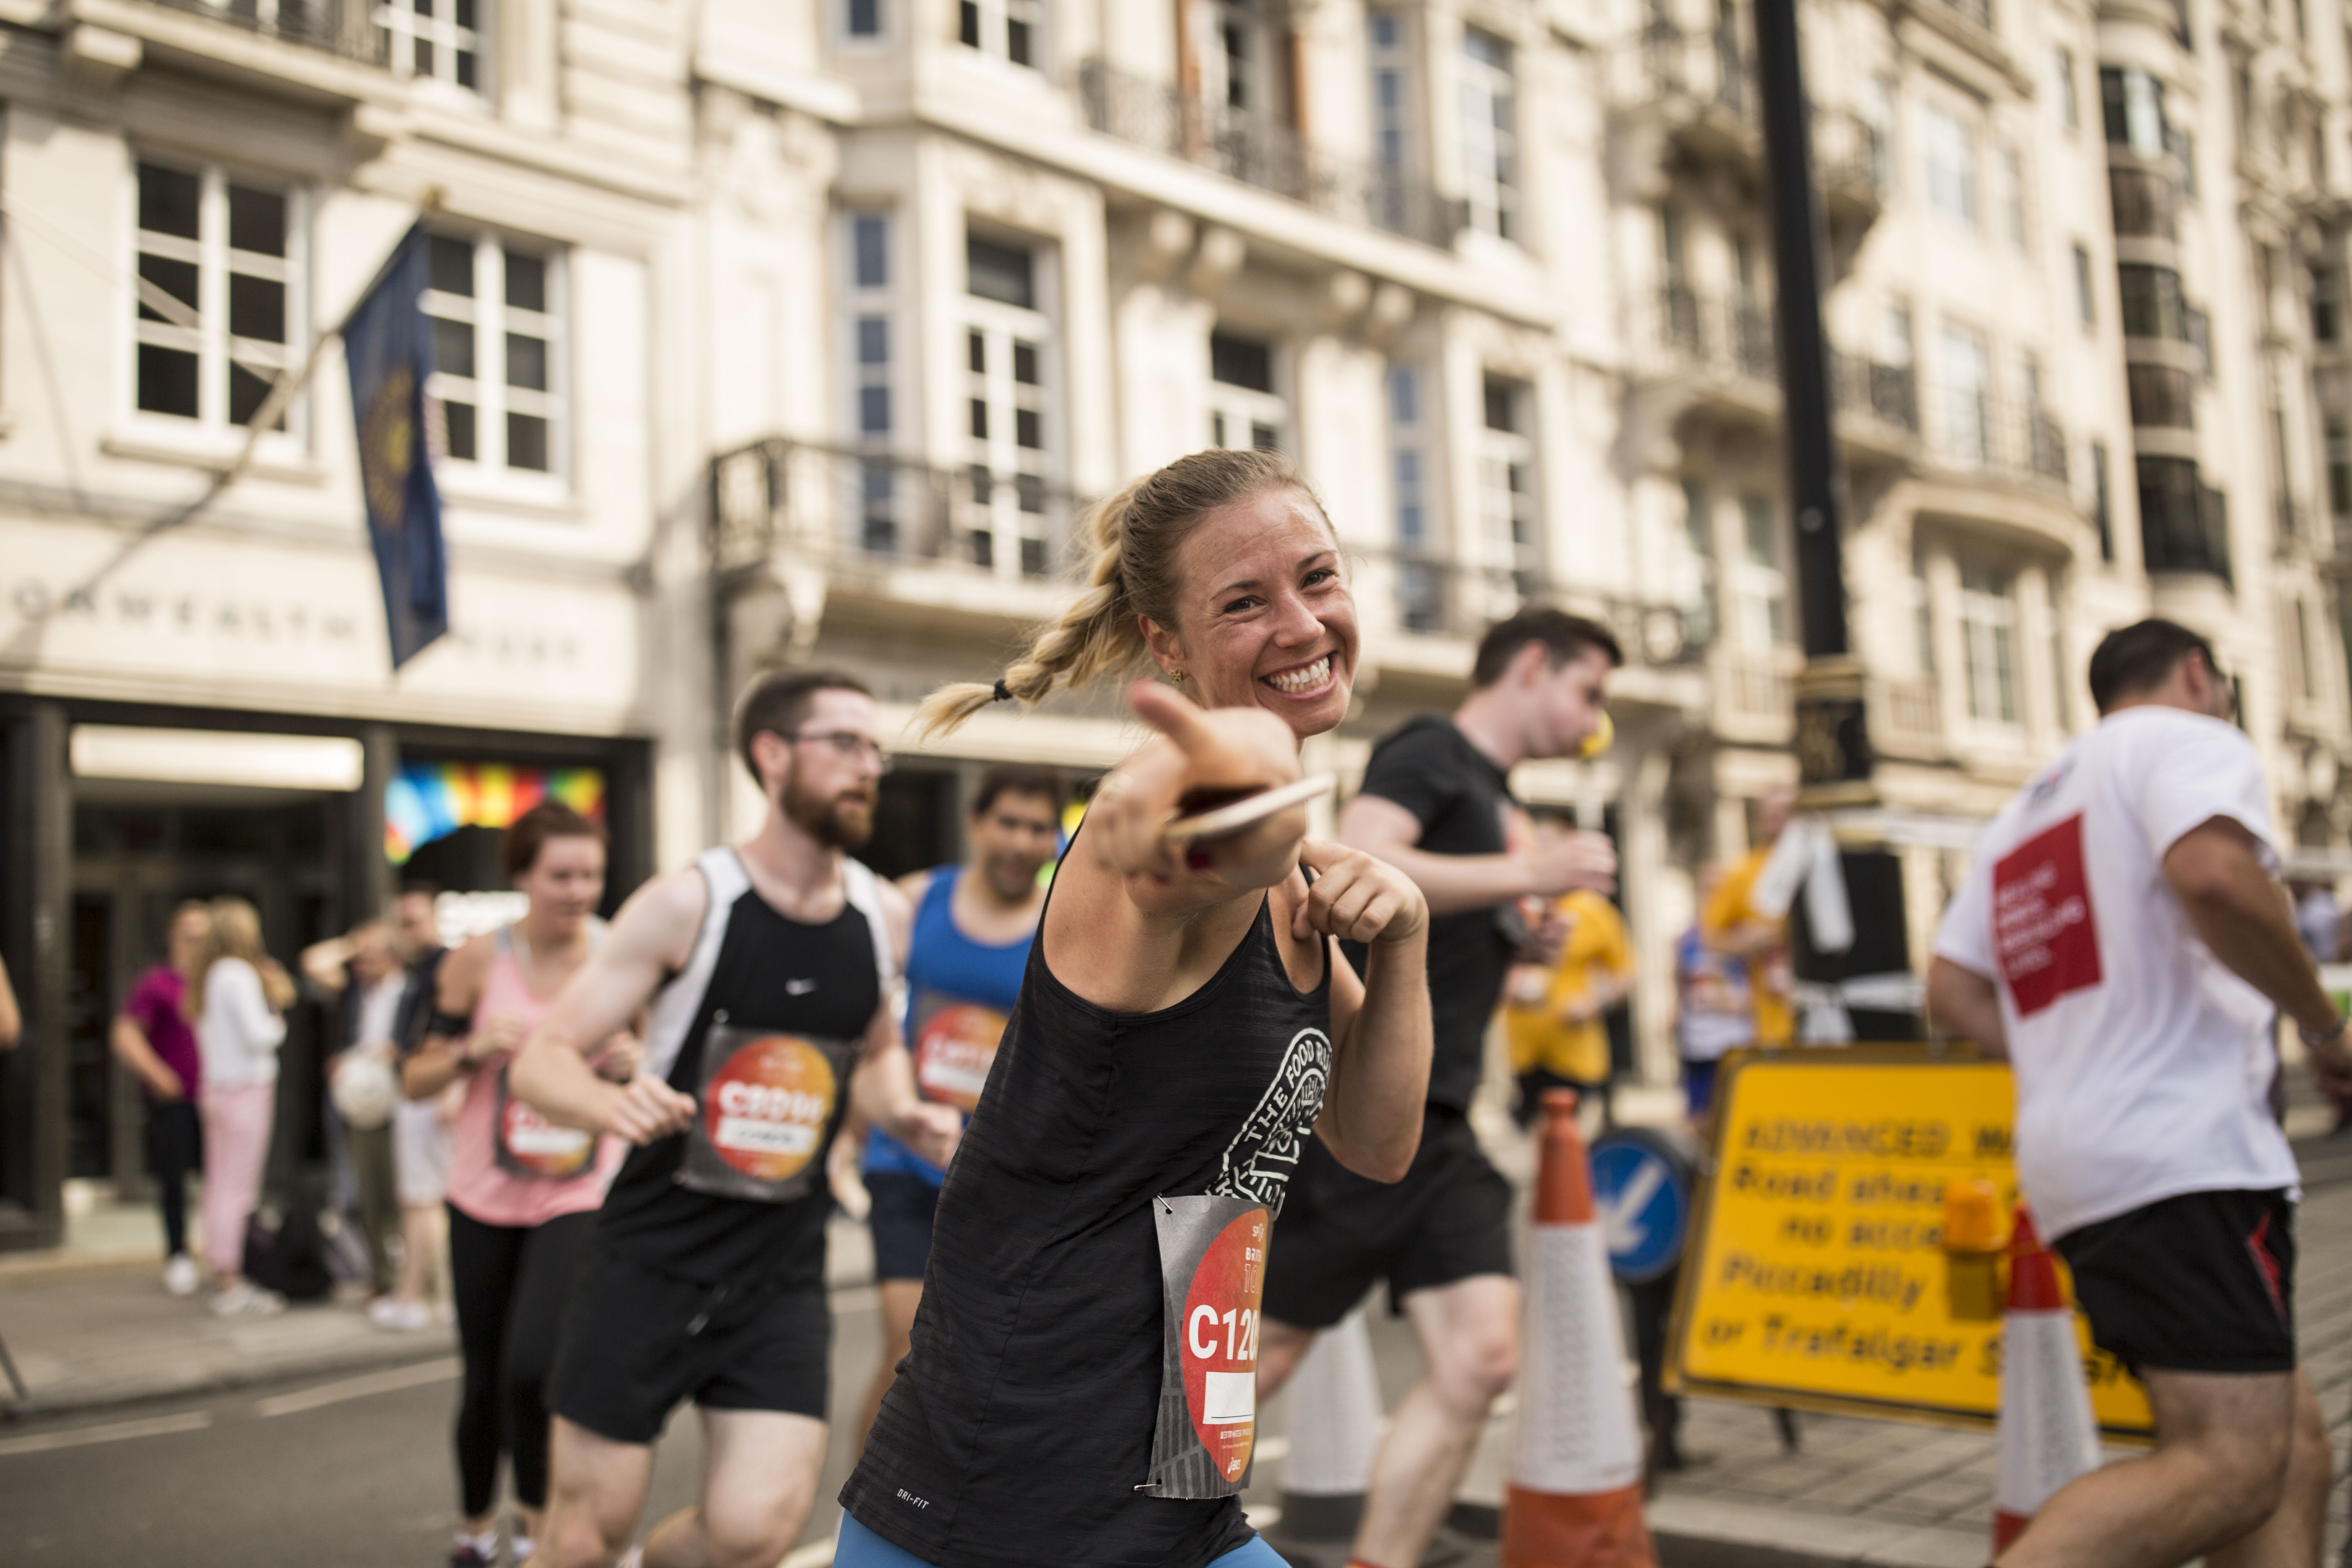 A lady running through Westminster, London, as part of the Asics London 10k race